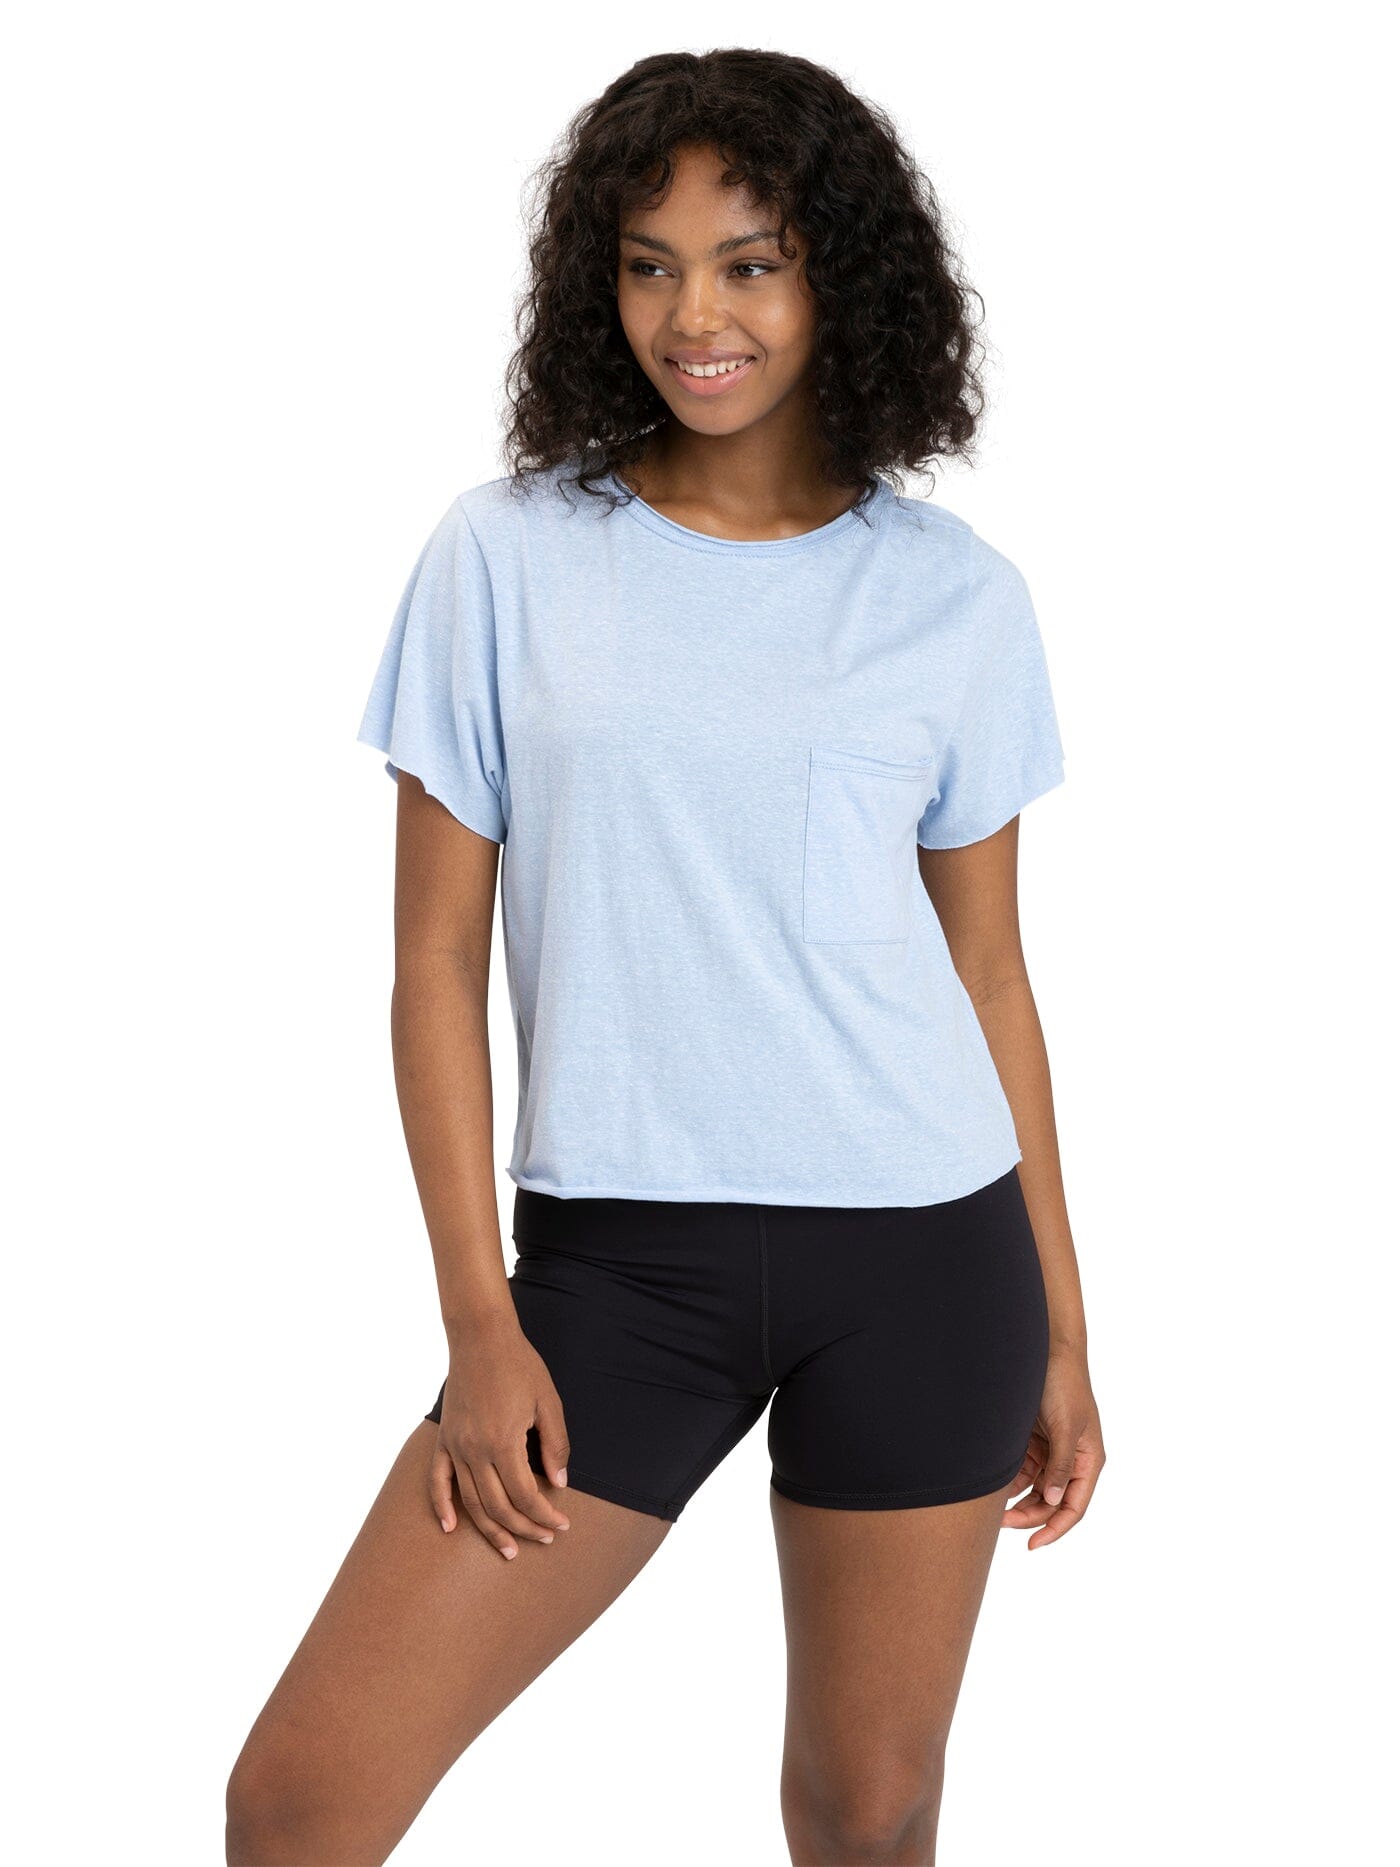 Maggie Triblend Pocket Tee Womens Tops Short Threads 4 Thought 